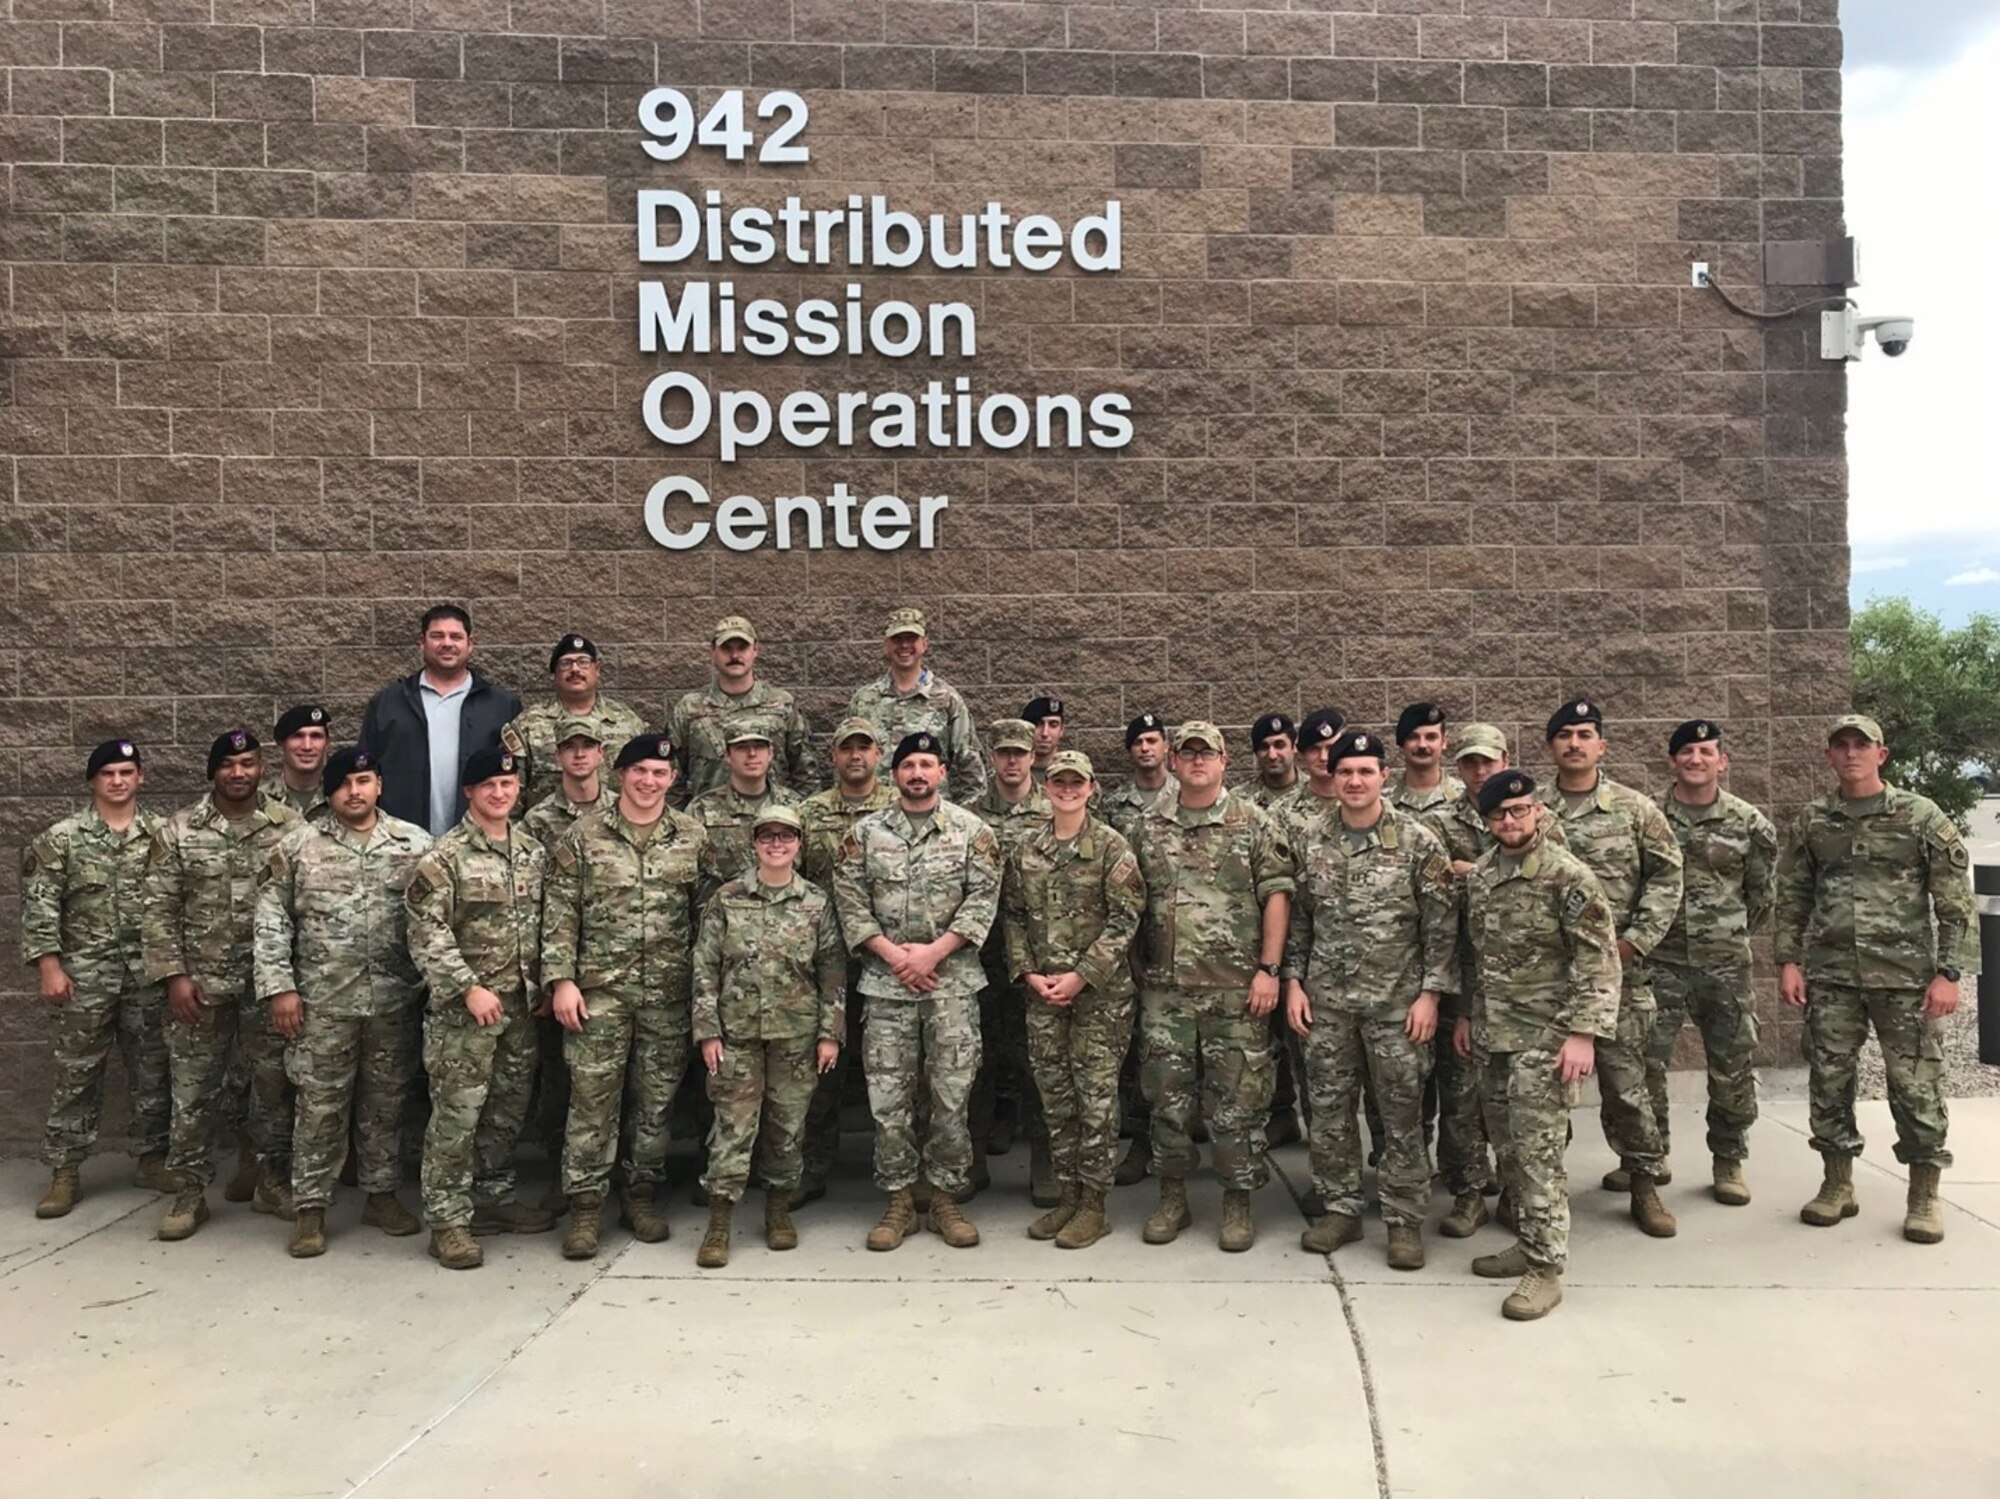 photo of a large group of US military personnel standing in front of a building